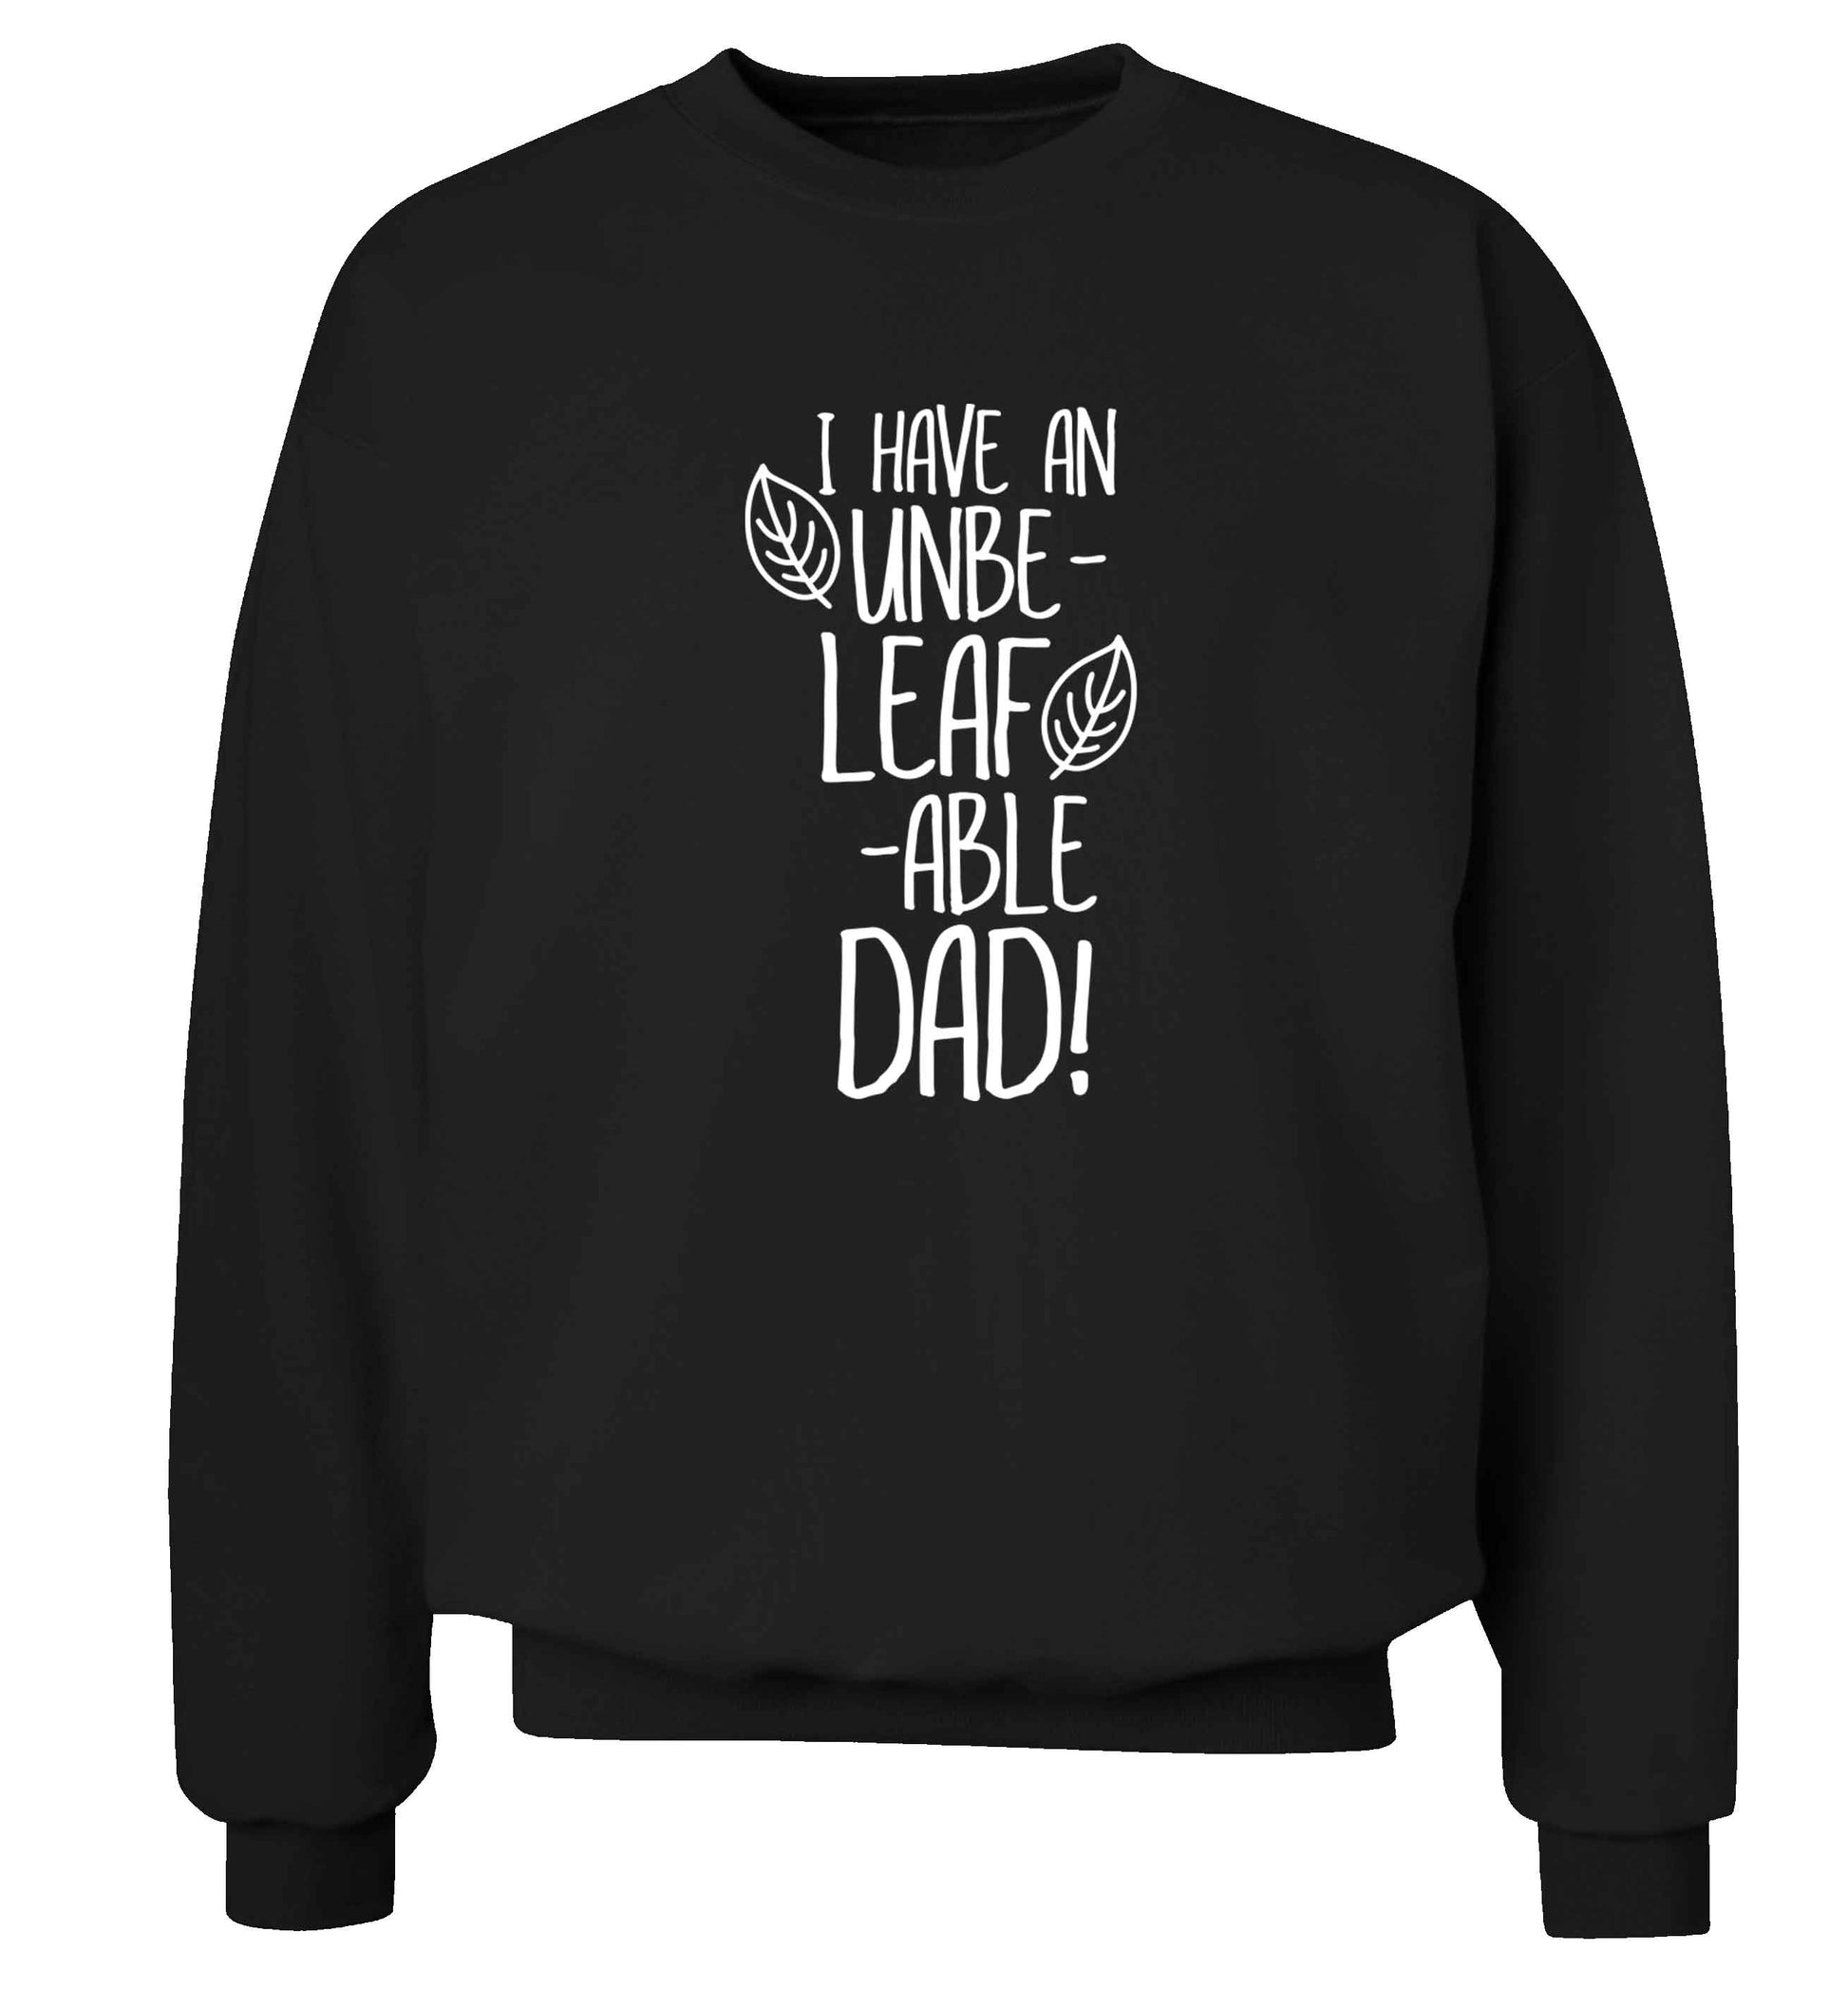 I have an unbe-leaf-able dad Adult's unisex black Sweater 2XL